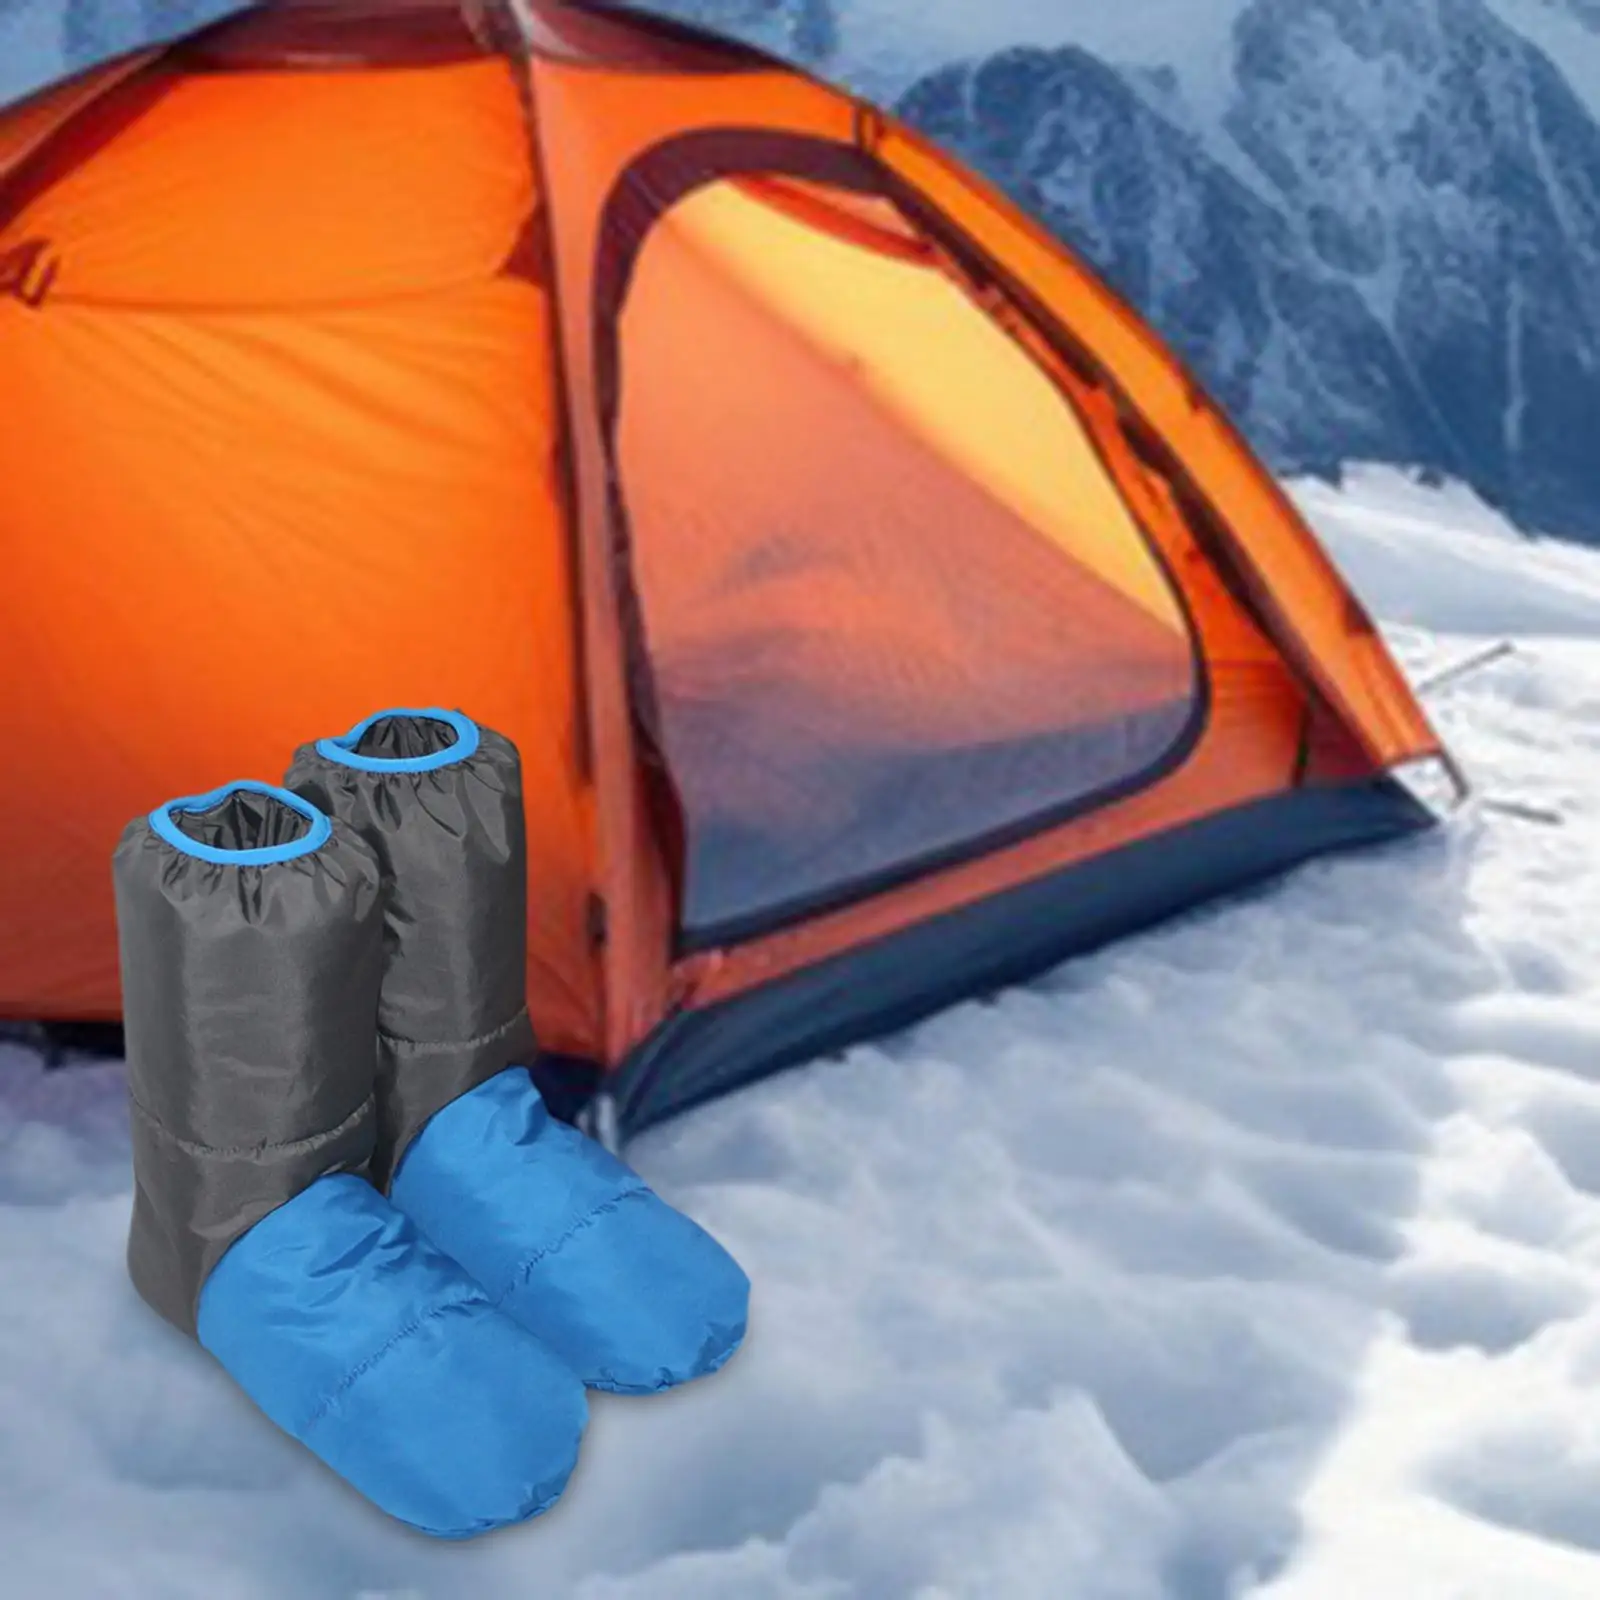 Down Booties Down Shoes Warm Boots Soft Feet Cover Socks Down Boots for Camping Hiking Backpacking Snowboard